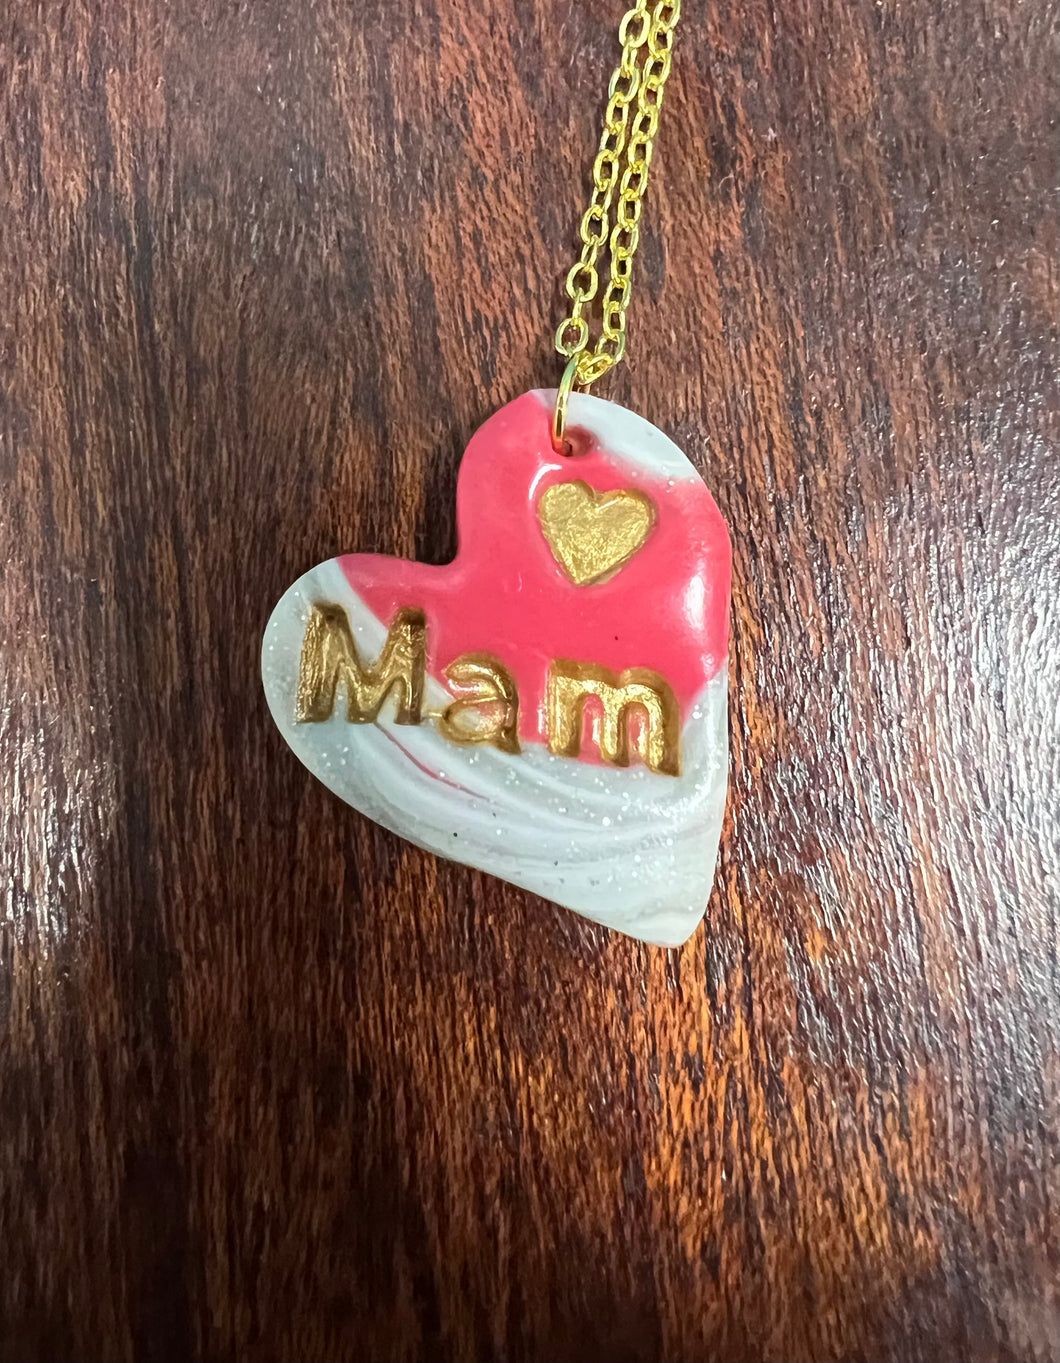 Mwclis marbl ‘Mam’ / ‘Mam’ marble necklace